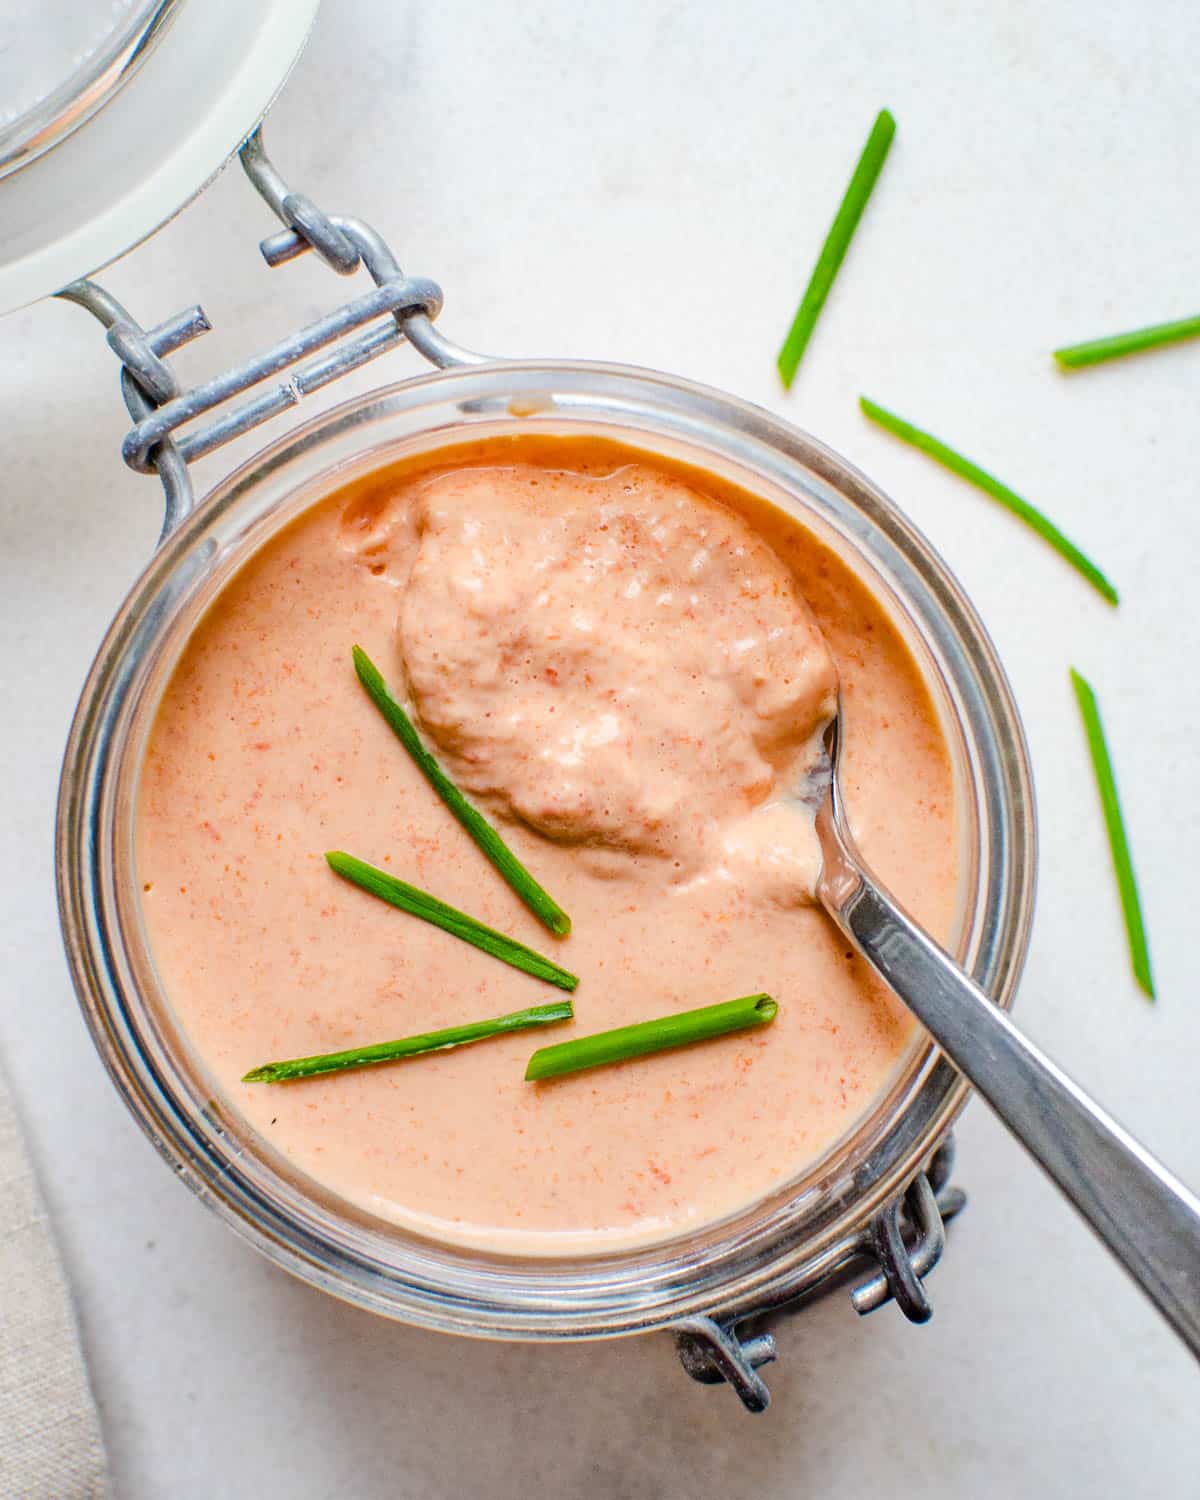 Serving a jar of red pepper aioli with chives on top.